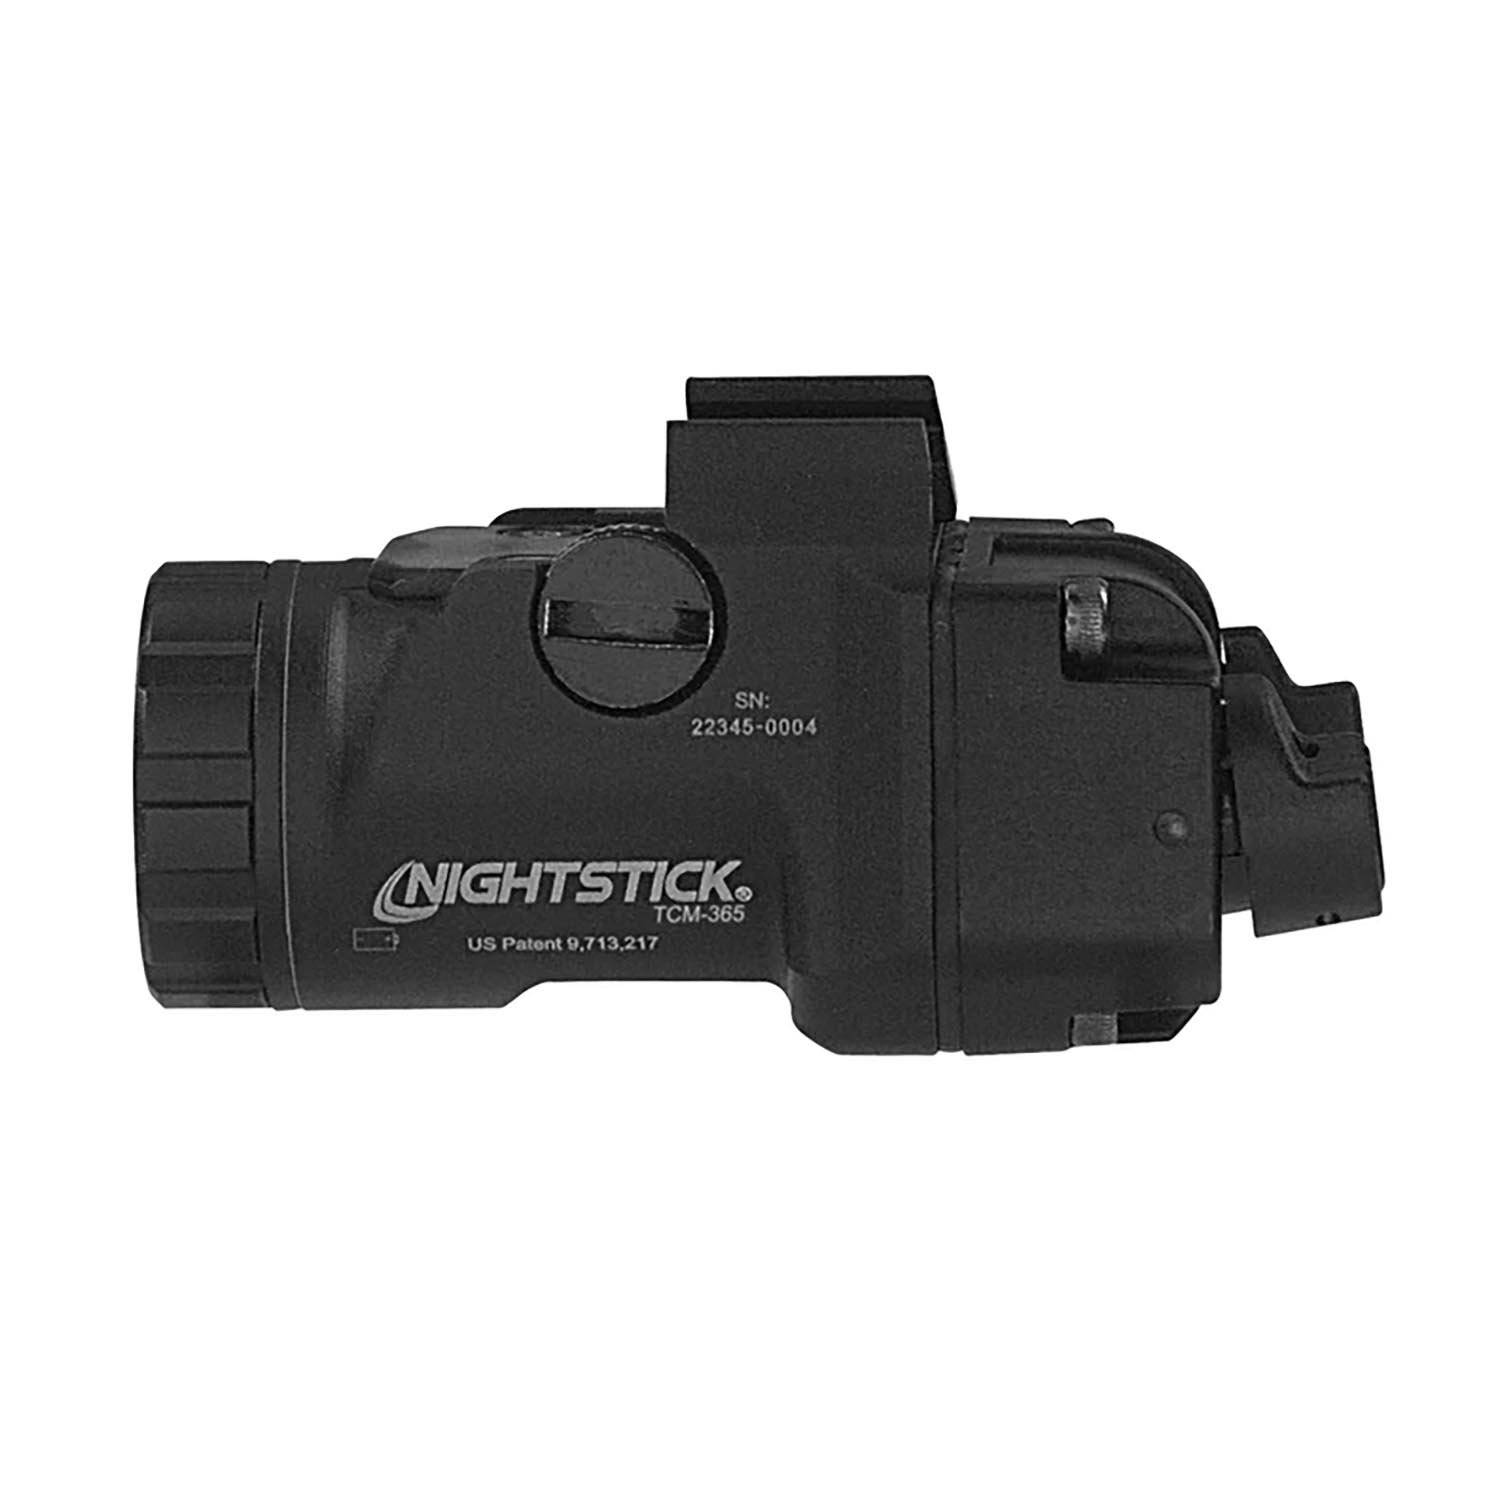 Nightstick TCM-365 Subcompact Weapon-Mounted Light